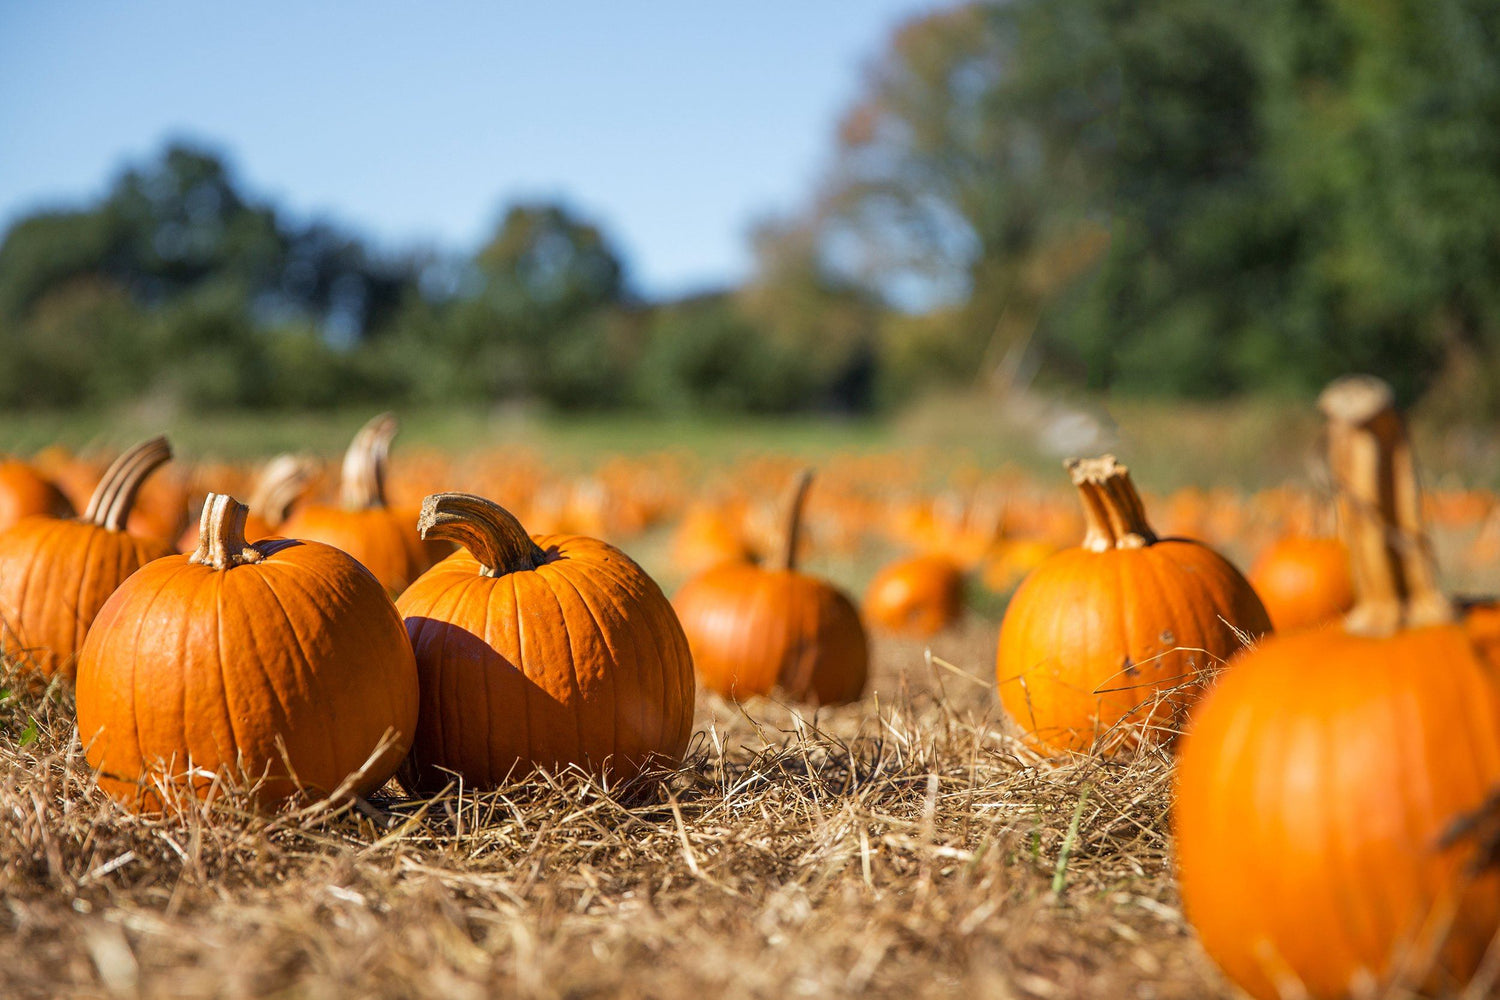 Not just for carving – how to enjoy pumpkins this Halloween